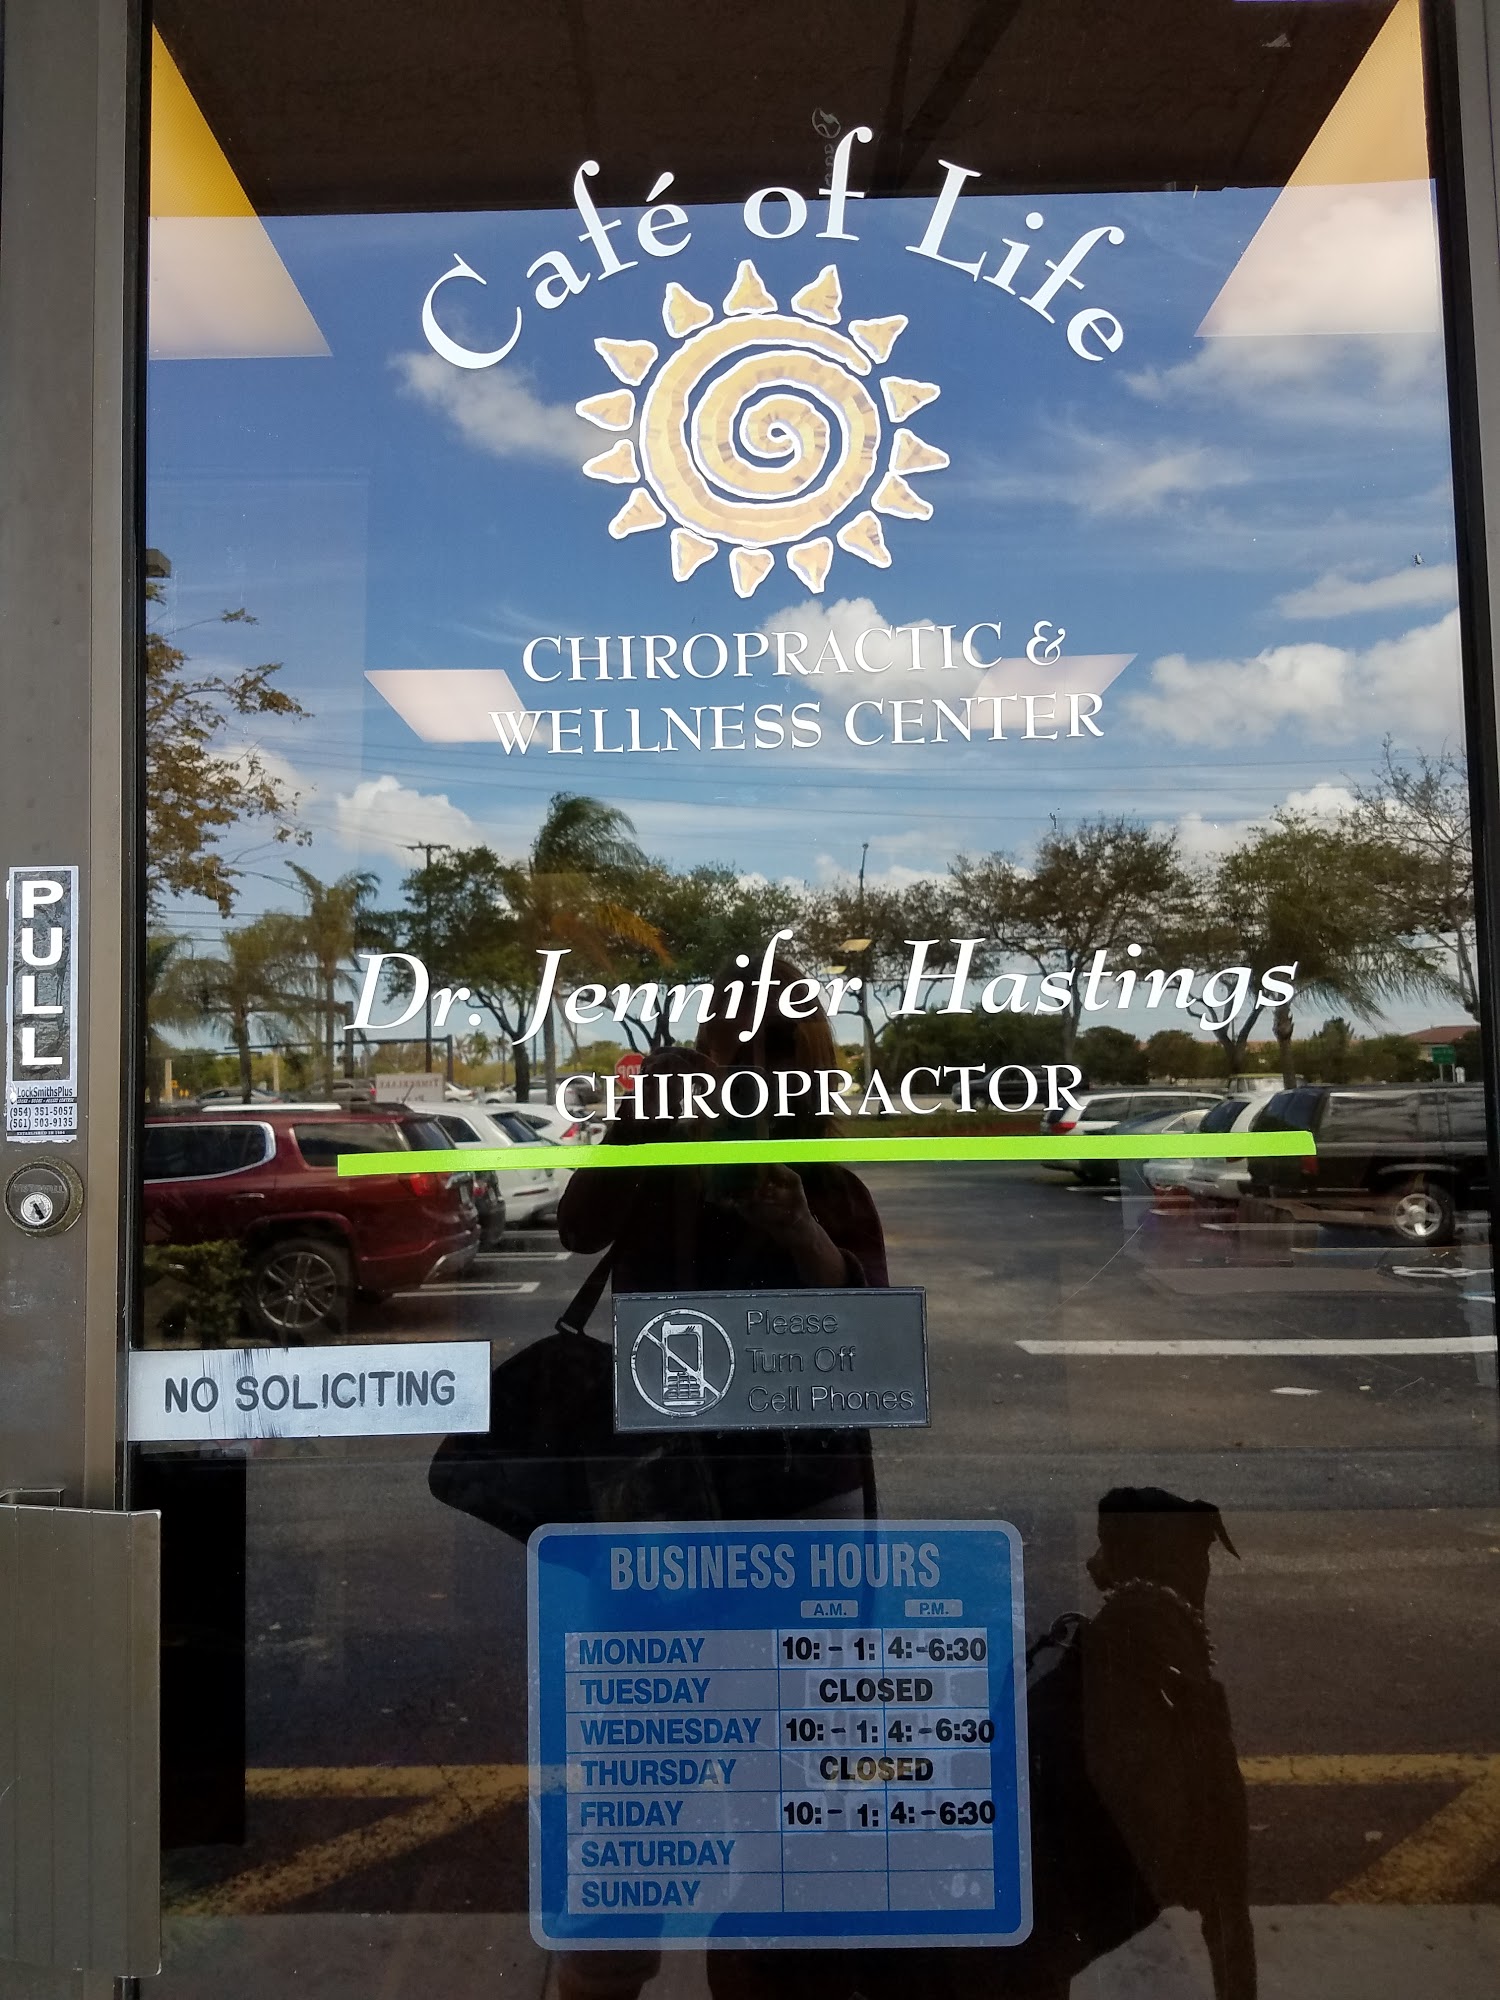 Cafe of Life Chiropractic and Wellness Center